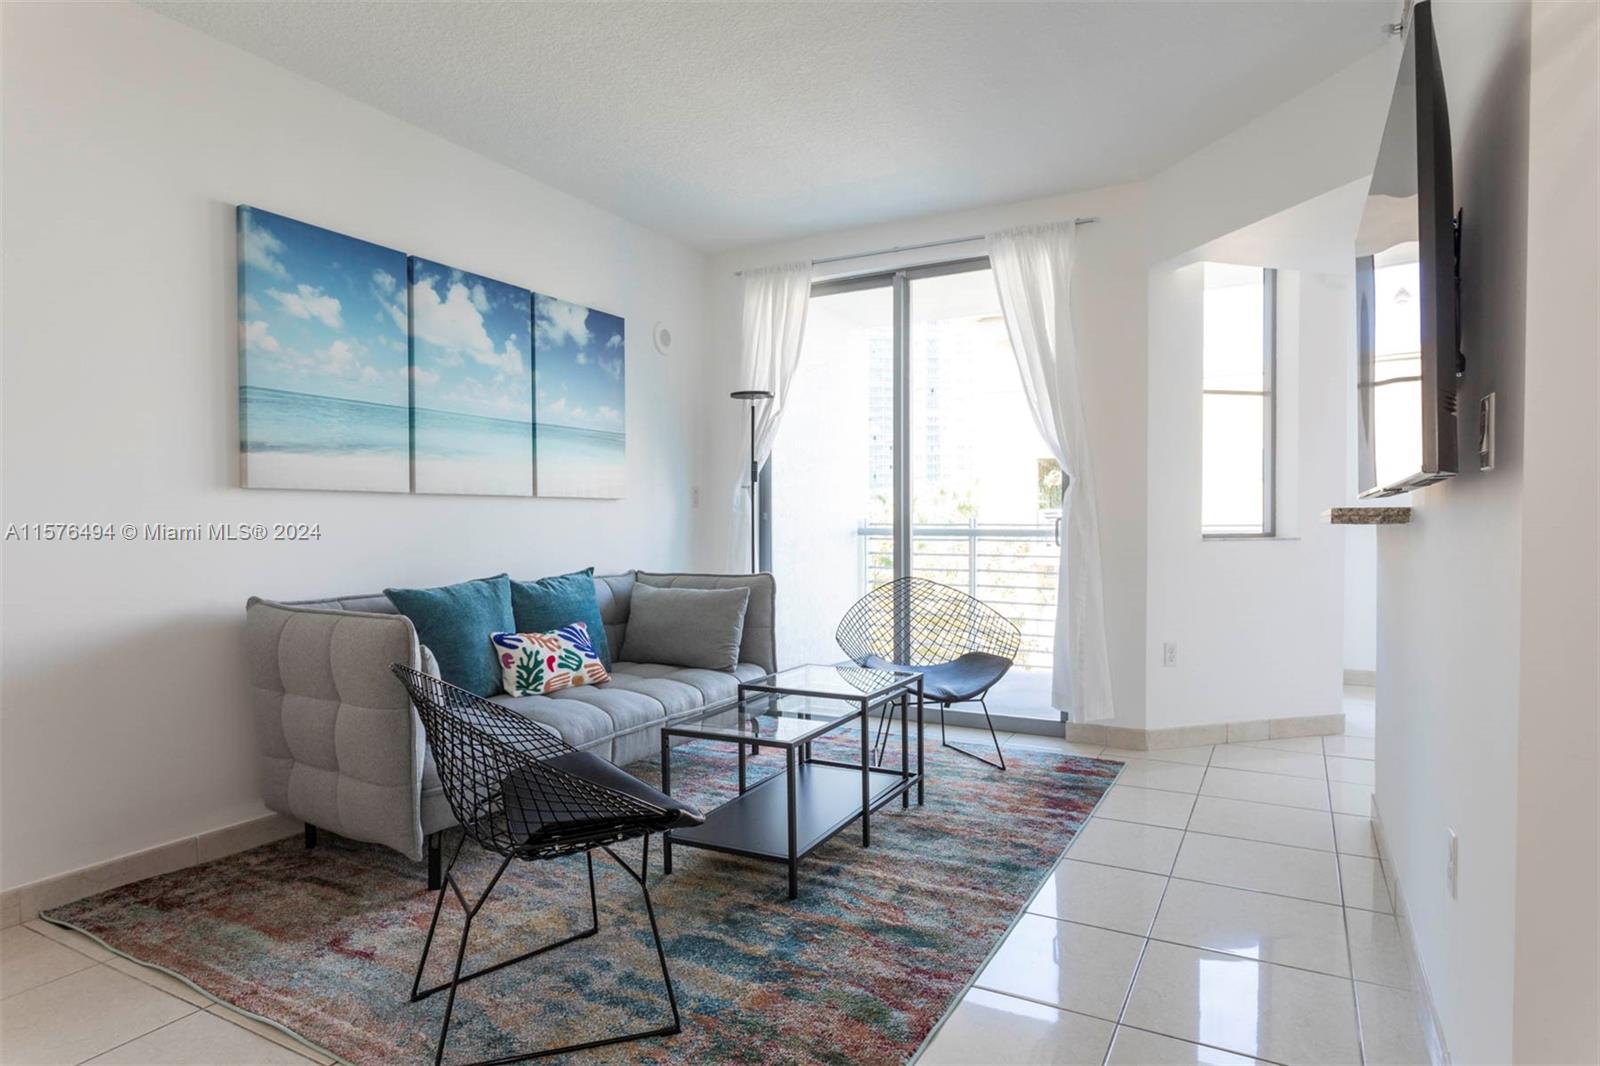 AVAILABLE JUNE 1! Newly updated & furnished. Located in the desirable South of Fifth neighborhood, only 2 blocks from the Ocean, this bright and large unit is the perfect Beach Pad with a private balcony, gourmet kitchen and stainless steel appliances. 24 hour security, front desk, resort-like pool area, and gym.